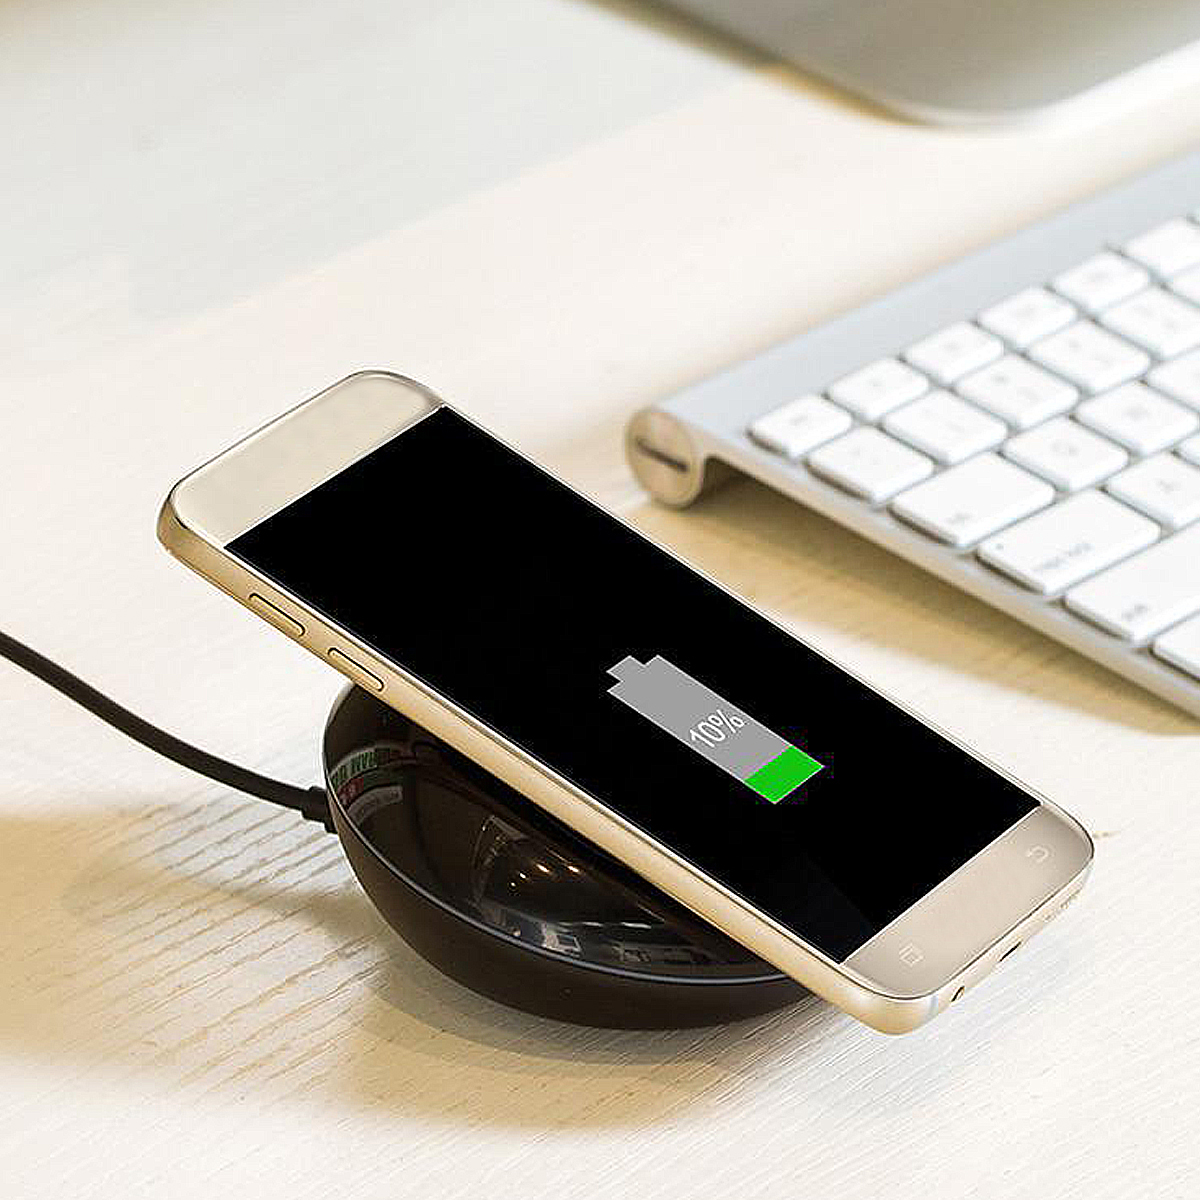 Bakeey-Qi-Wireless-Fast-Charger-With-LED-Indicator-For-iPhone-X-8Plus-Samsung-S7-S8-Note-8-1217829-9